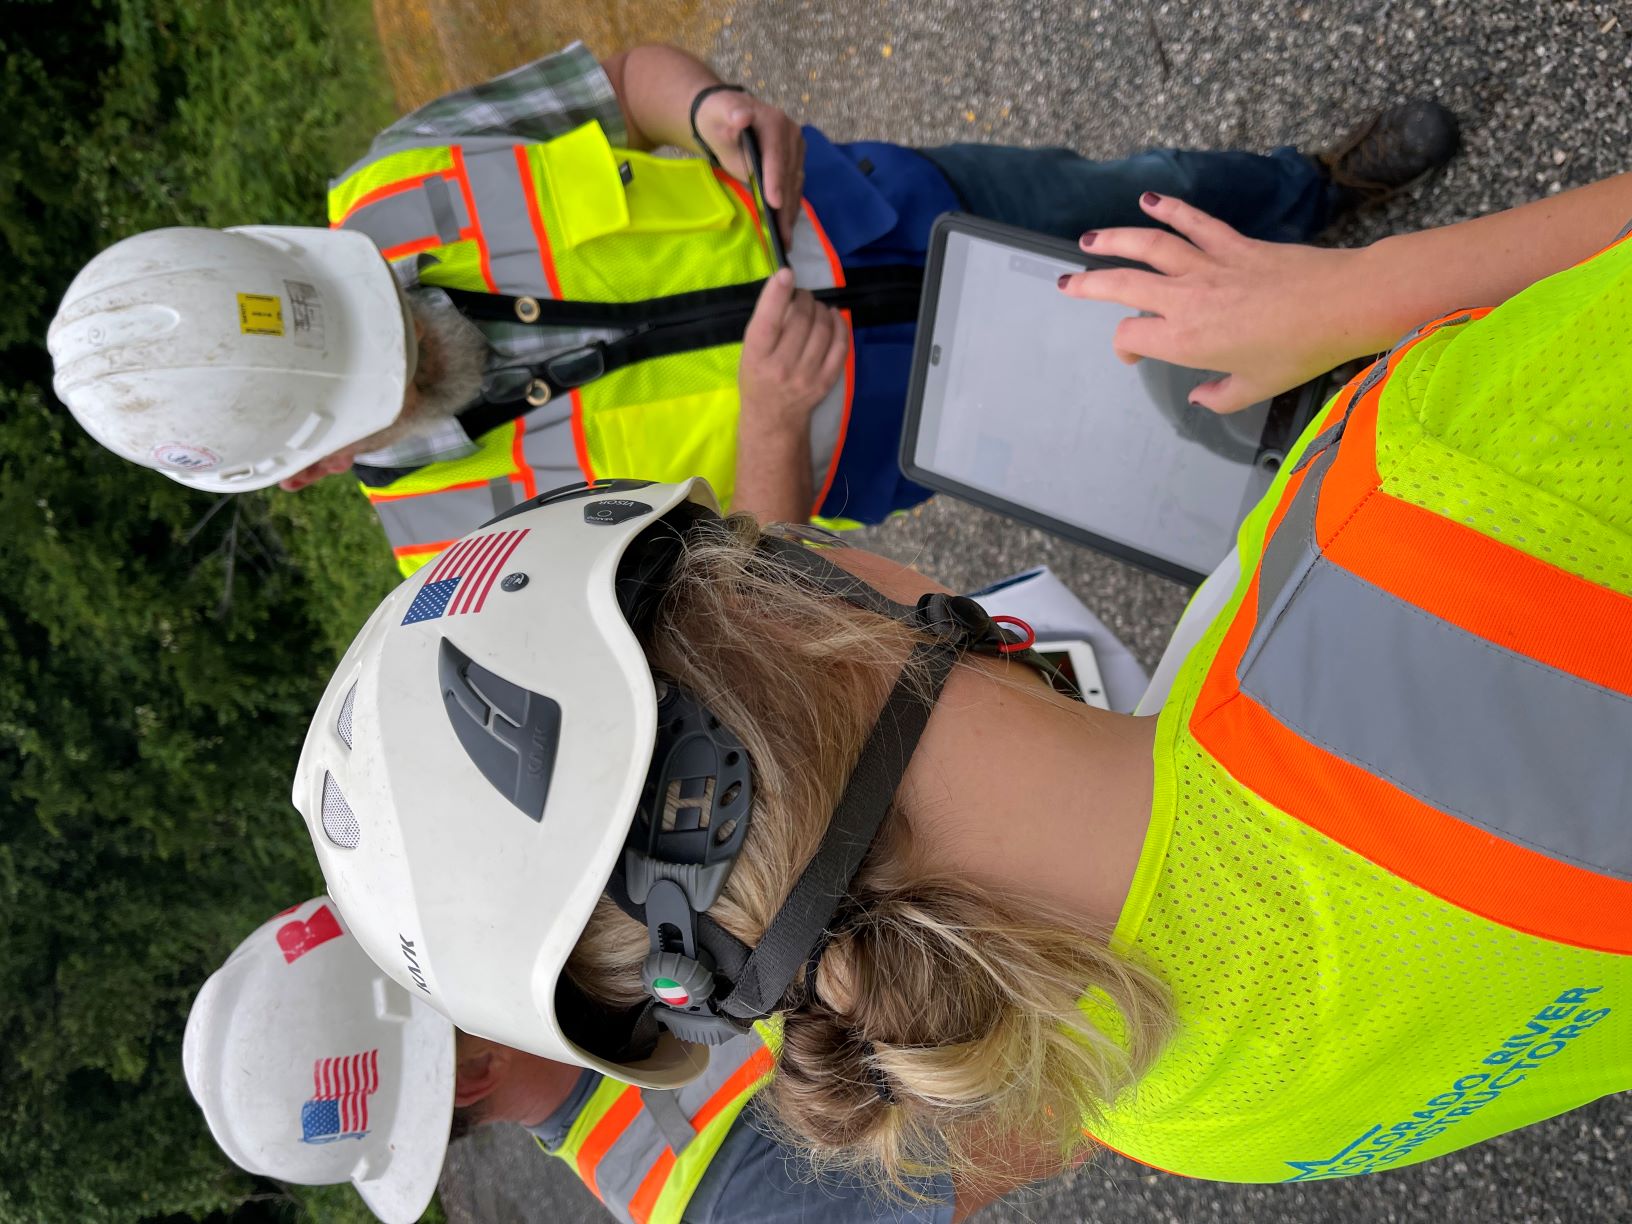 CRC crews use iPads to view design plans in the field, which increases productivity while also reducing paper waste, May 2021